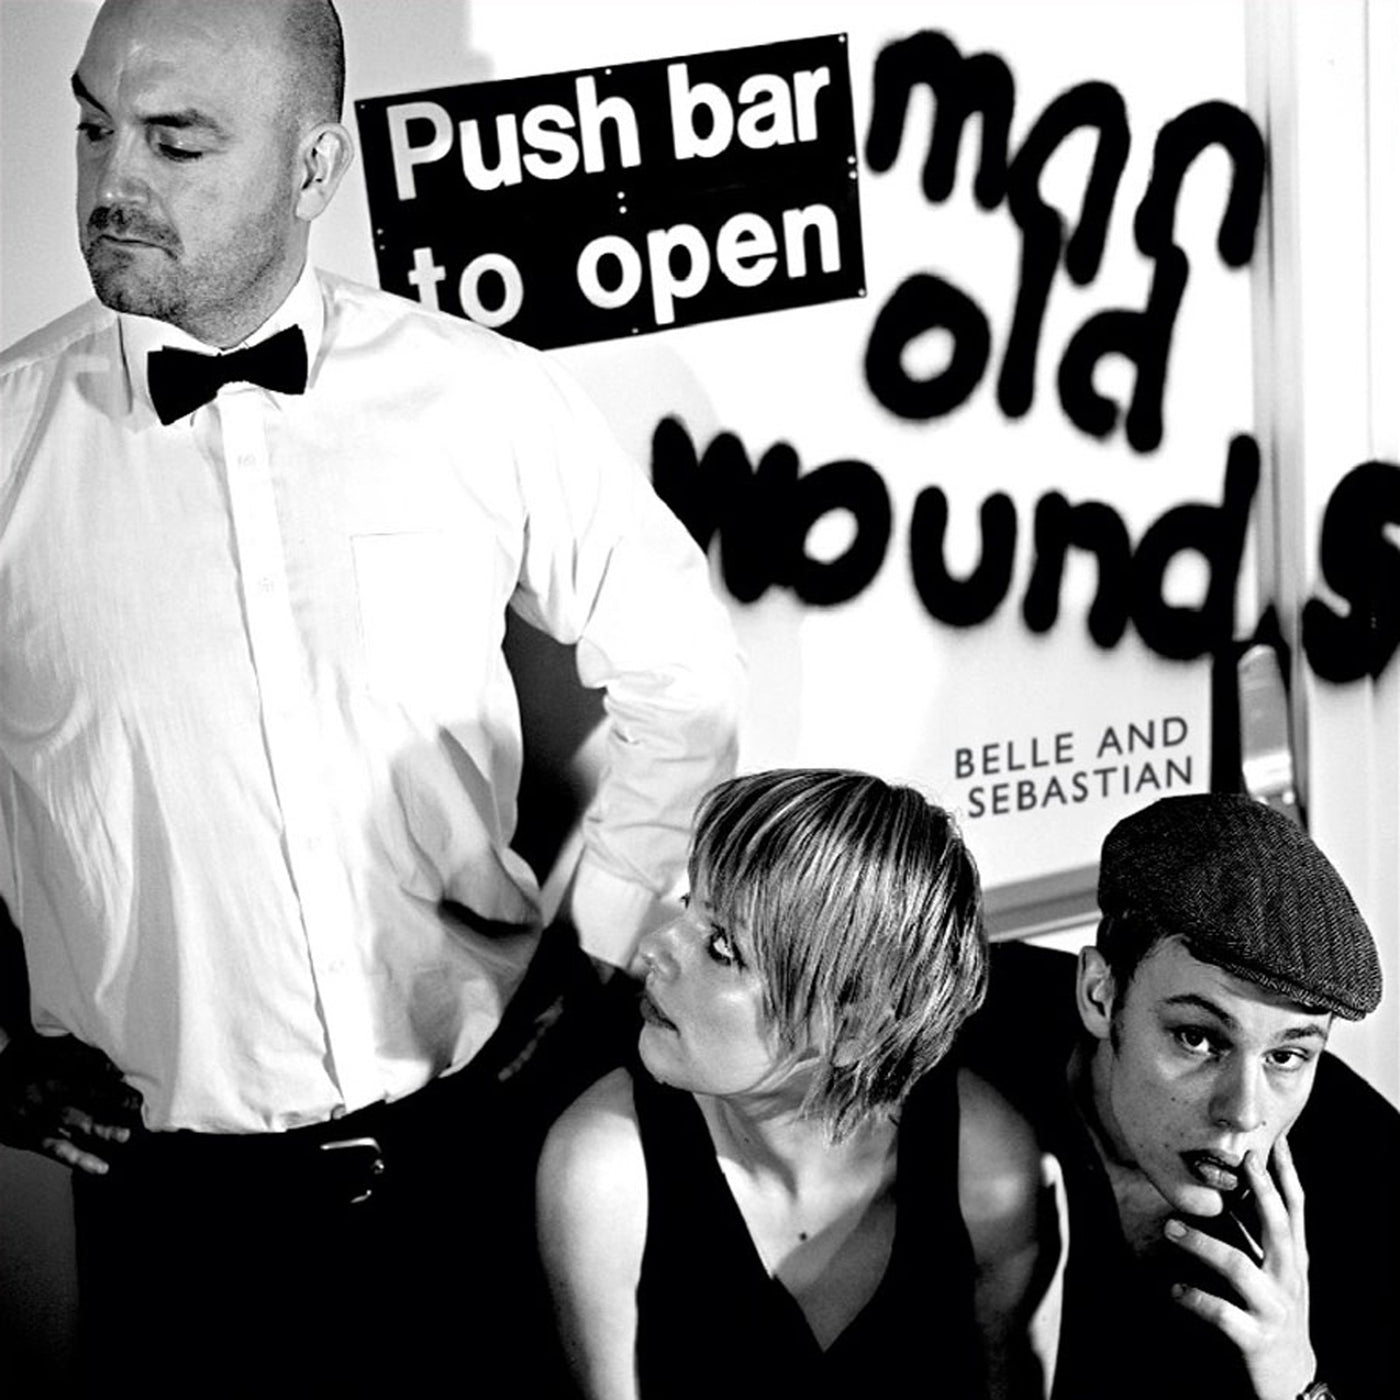 BELLE & SEBASTIAN - Push Barman To Open Old Wounds (Deluxe Edition) - 3LP - Limited Clear Vinyl